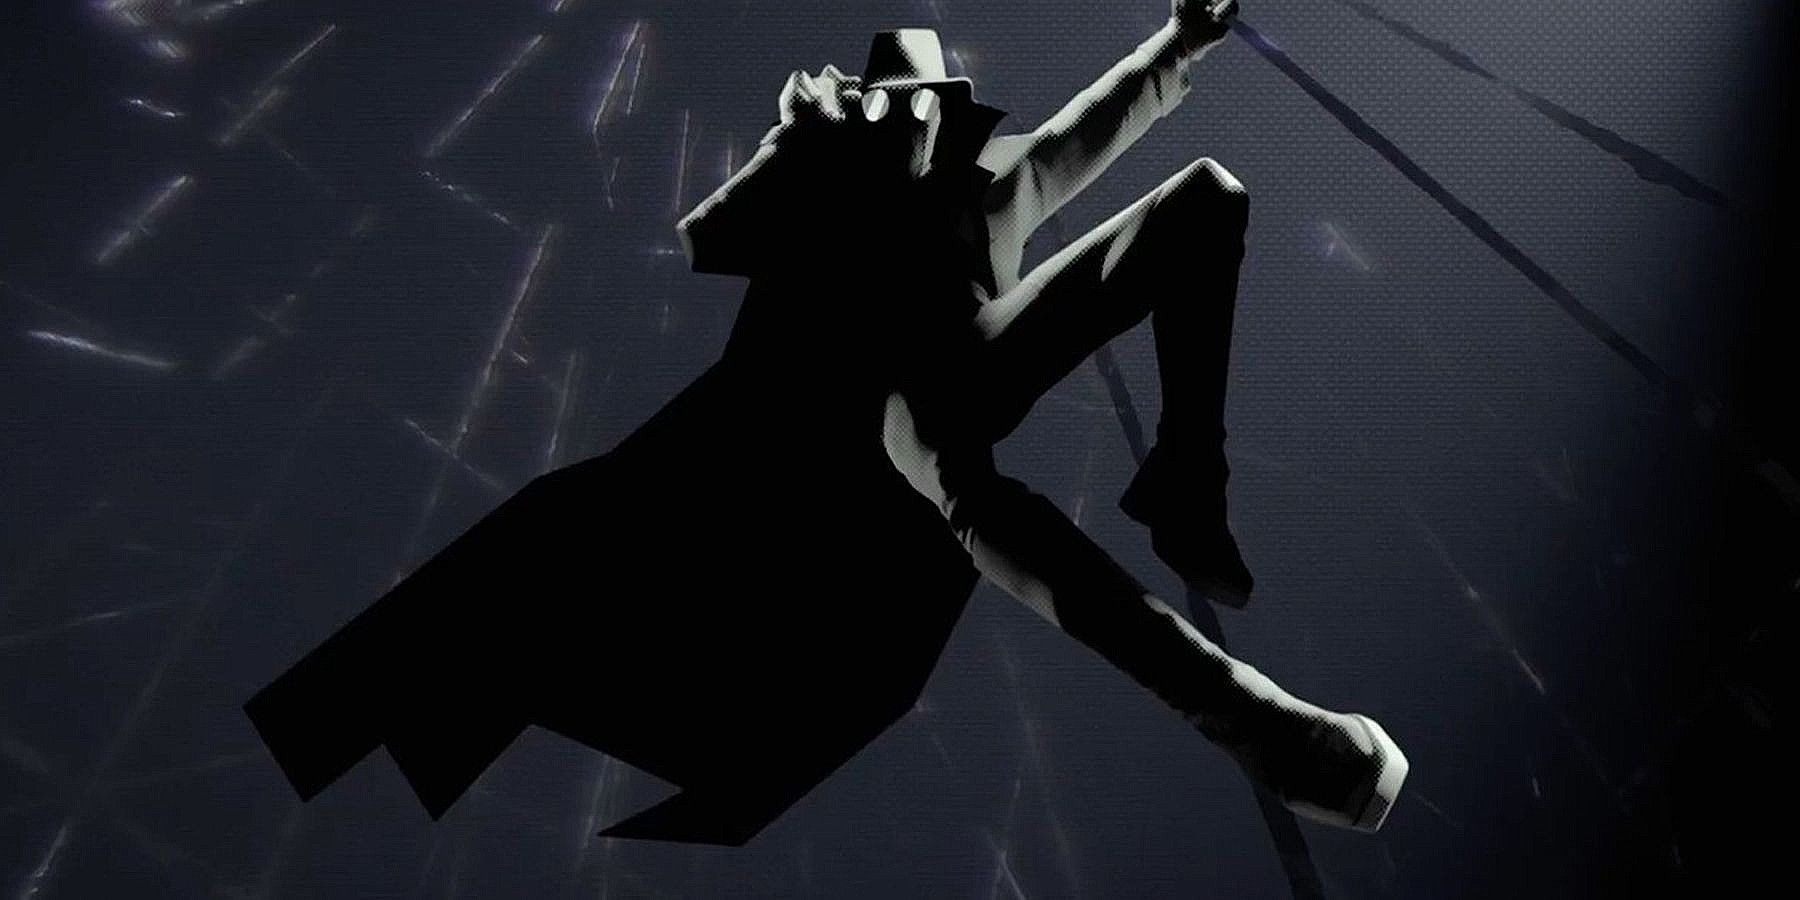 Spider-Man Noir (Nicolas Cage) adjusts his hat while swinging on a web in Into the Spider-Verse